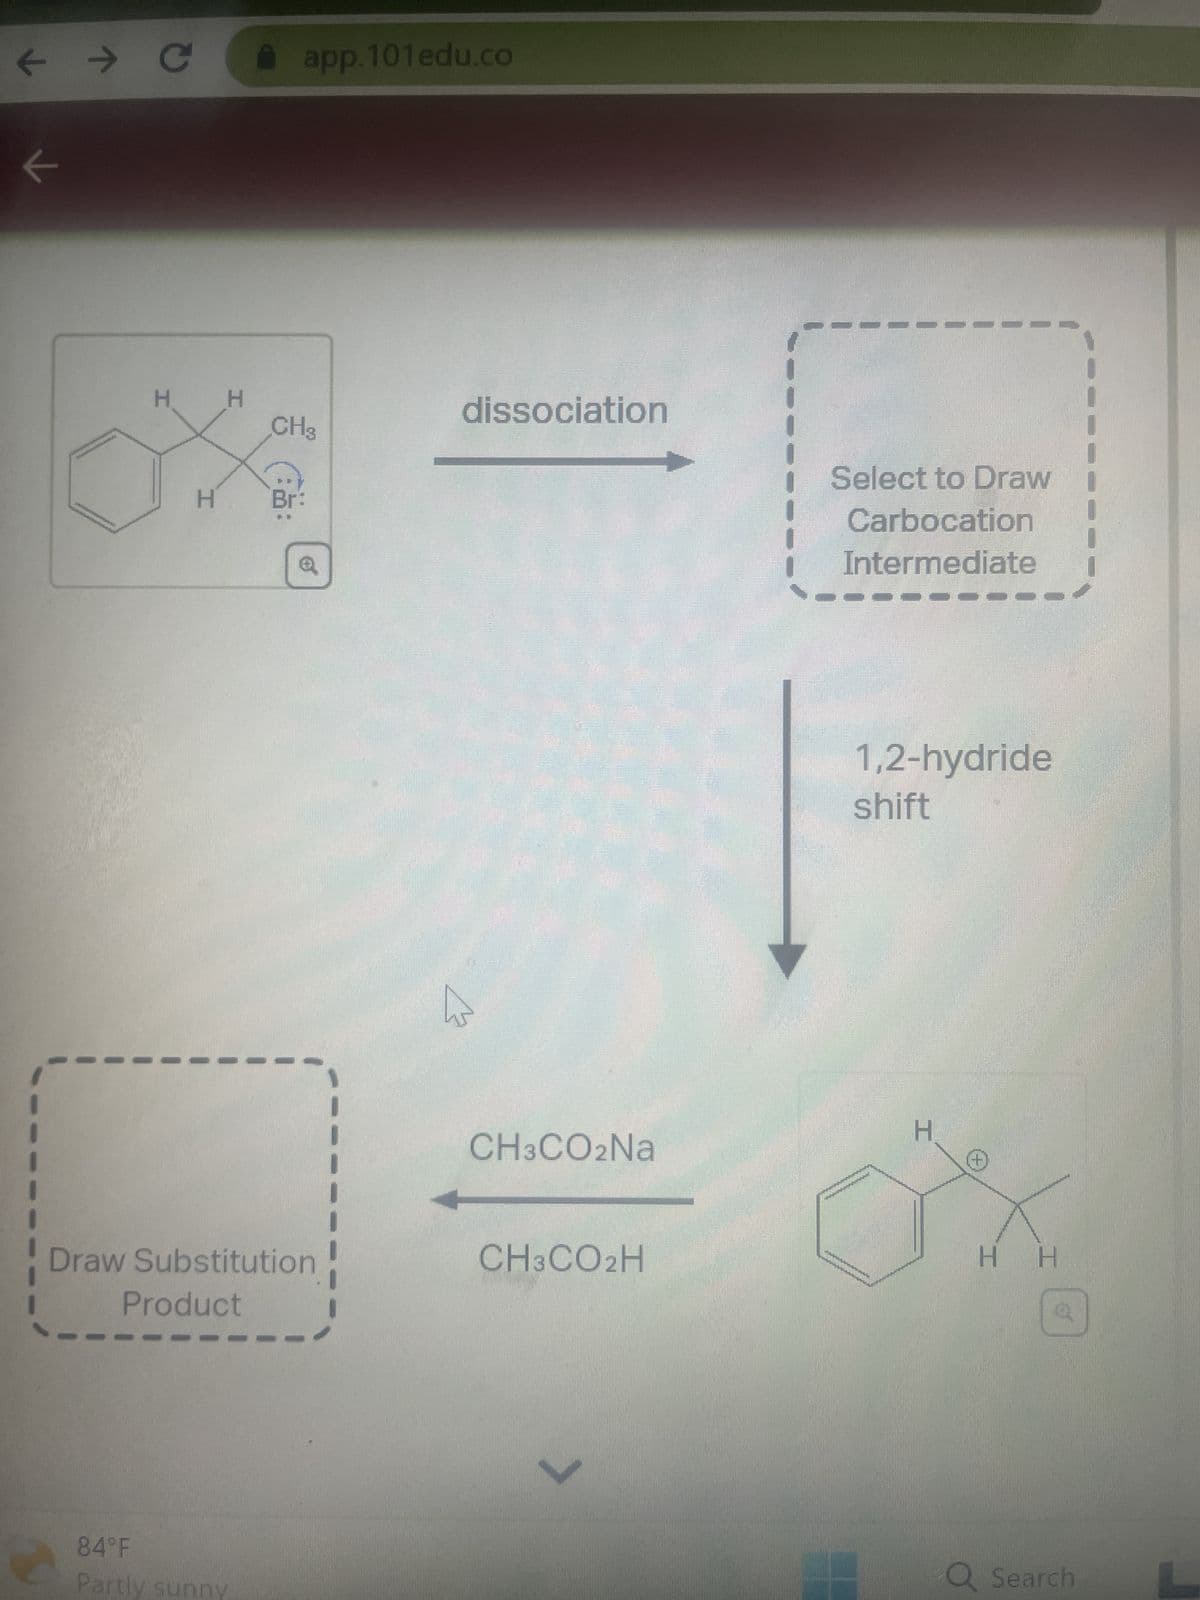 ← → C
K
H
H
H
app.101edu.co
84°F
Partly sunny
CH3
of
Draw Substitution
Product
dissociation
CH3CO2Na
CH3CO2H
L
Select to Draw
Carbocation
Intermediate
1,2-hydride
shift
H
Η Η
Q Search